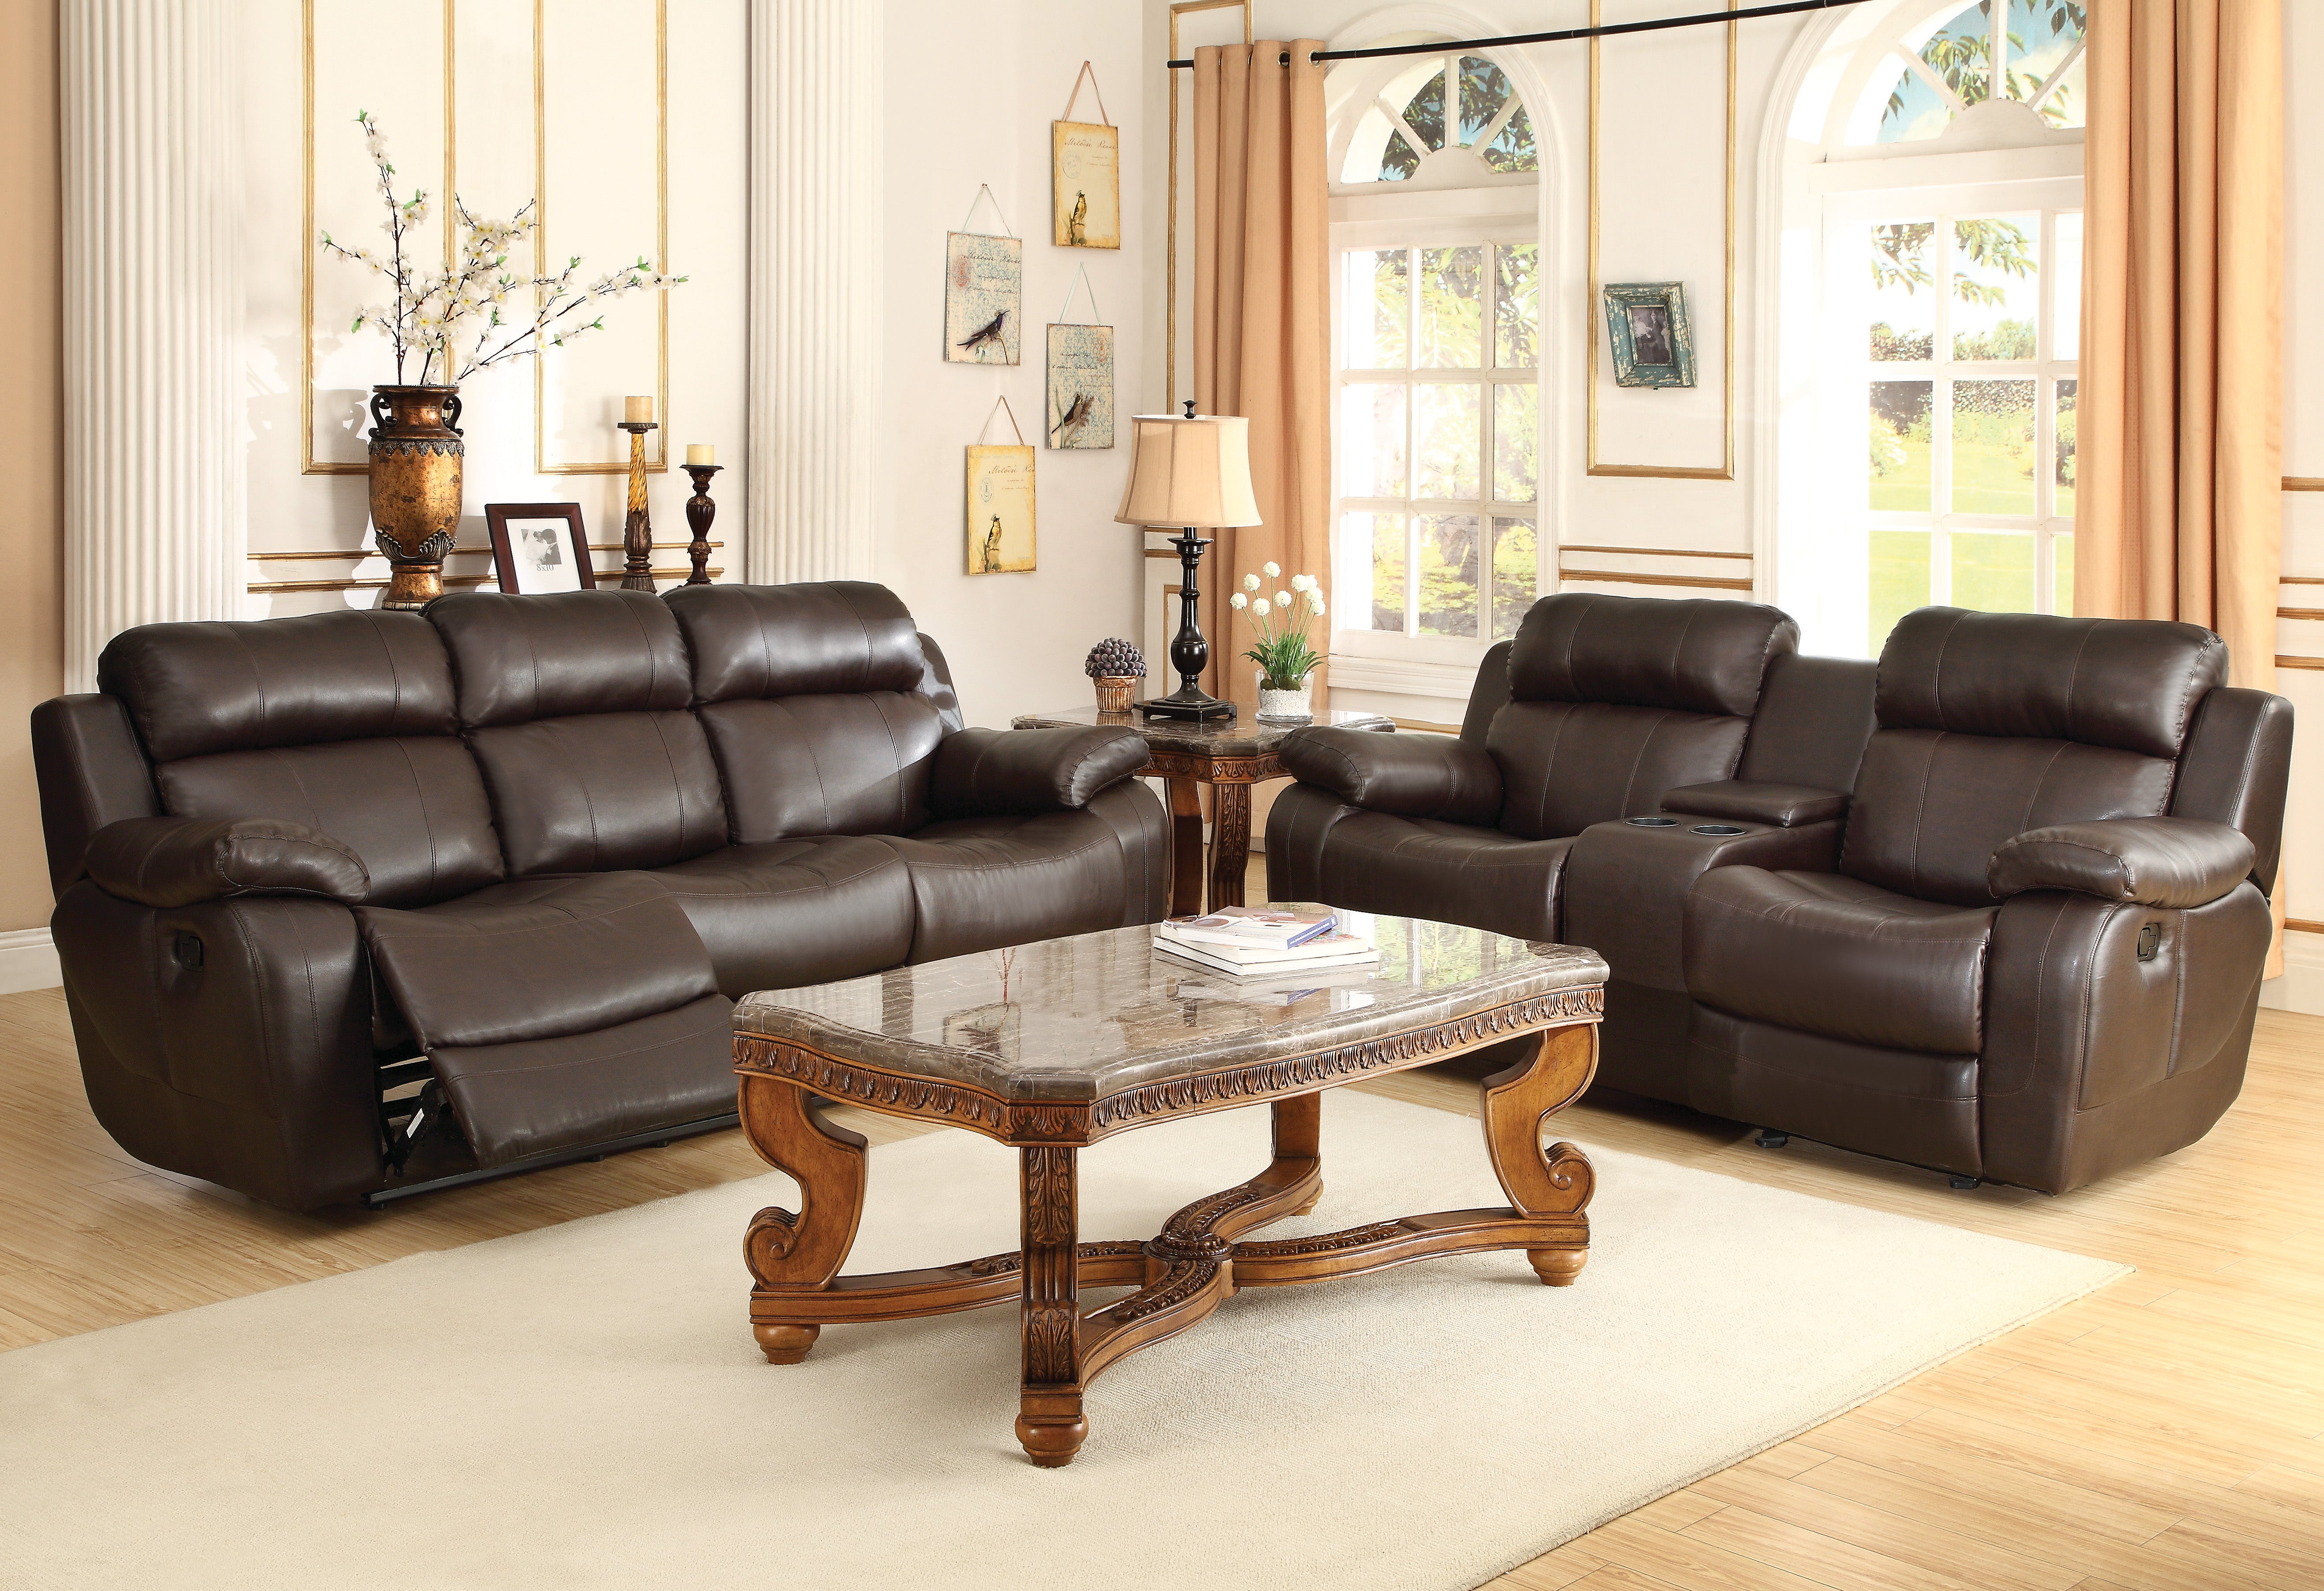 Marille Brown Bonded Leather Reclining Living Room Set from Homelegance